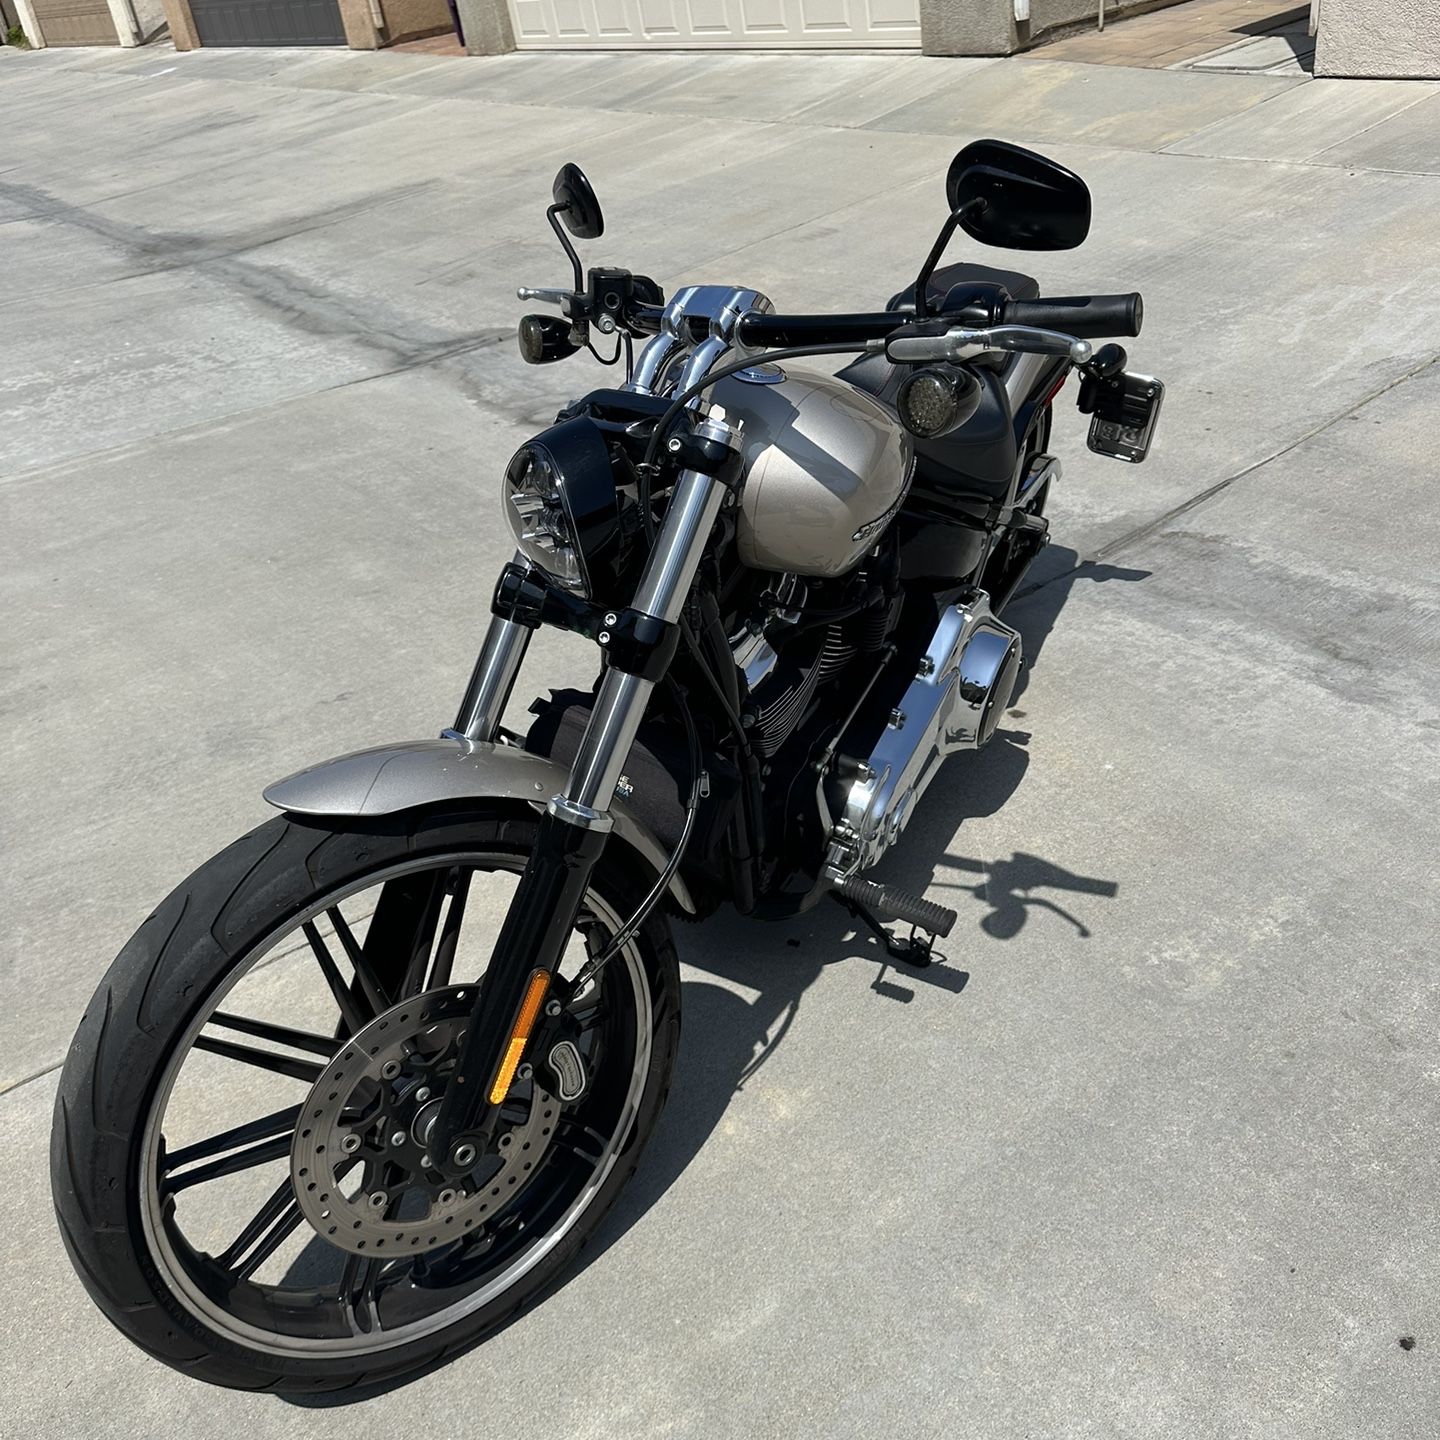 2018 Harley Davidson Breakout 114s MUST BUY TO DAY!